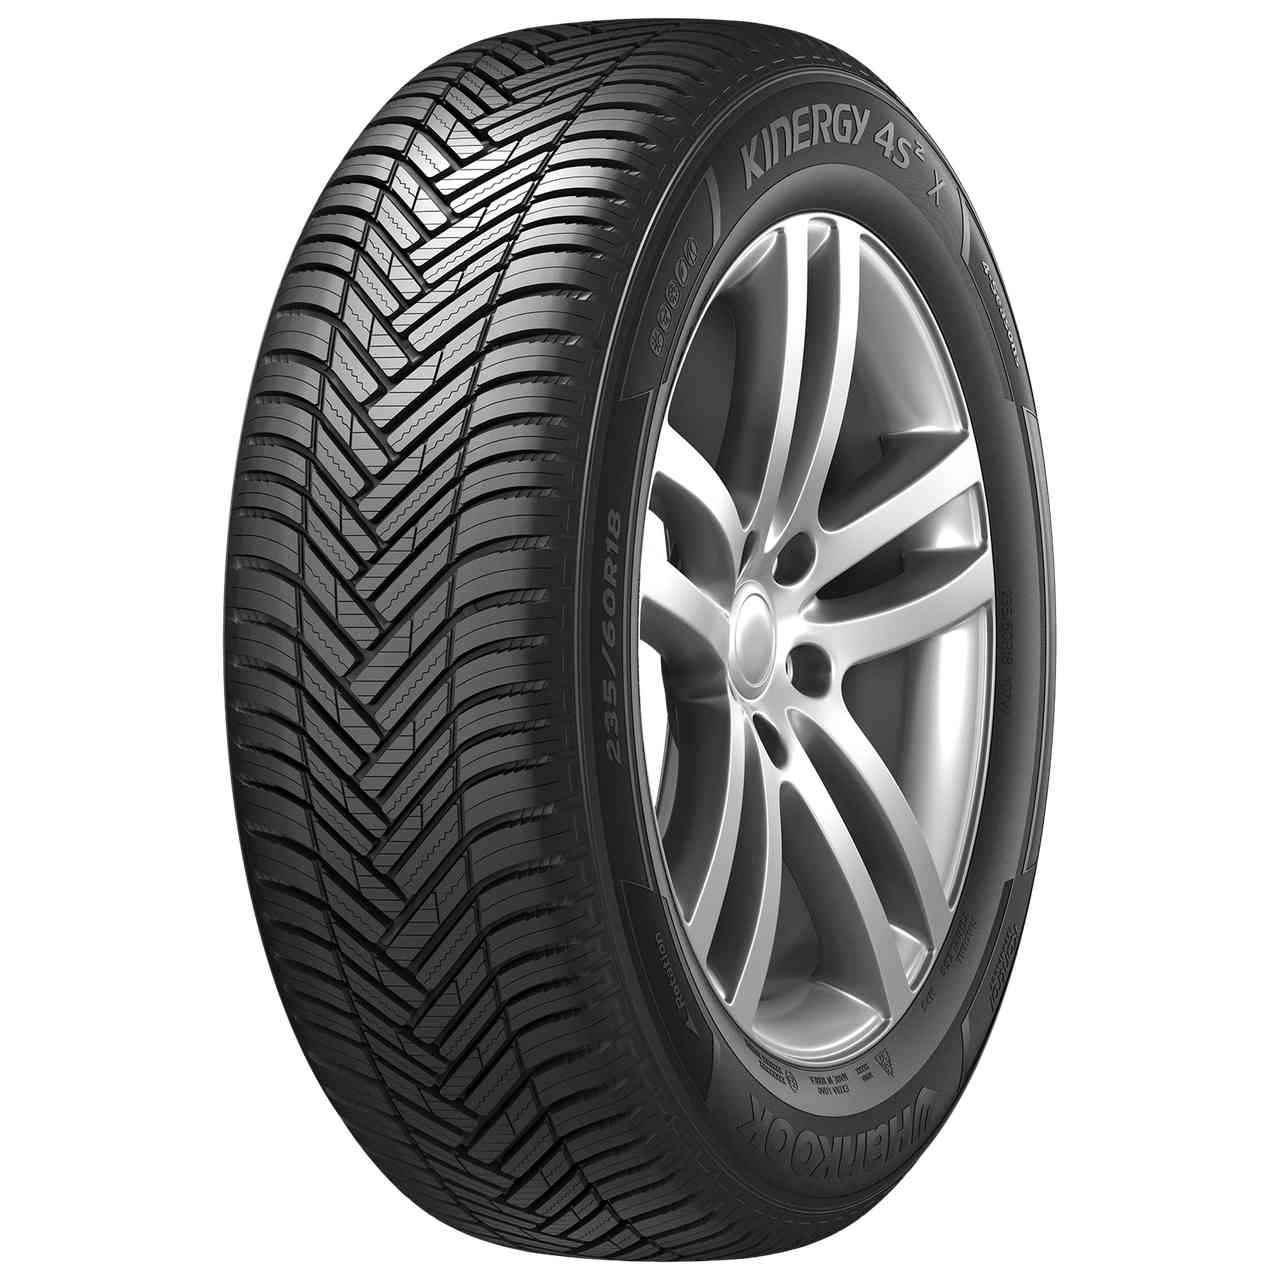 HANKOOK KINERGY 4S 2 X (H750A) 255/55ZR20 110Y BSW